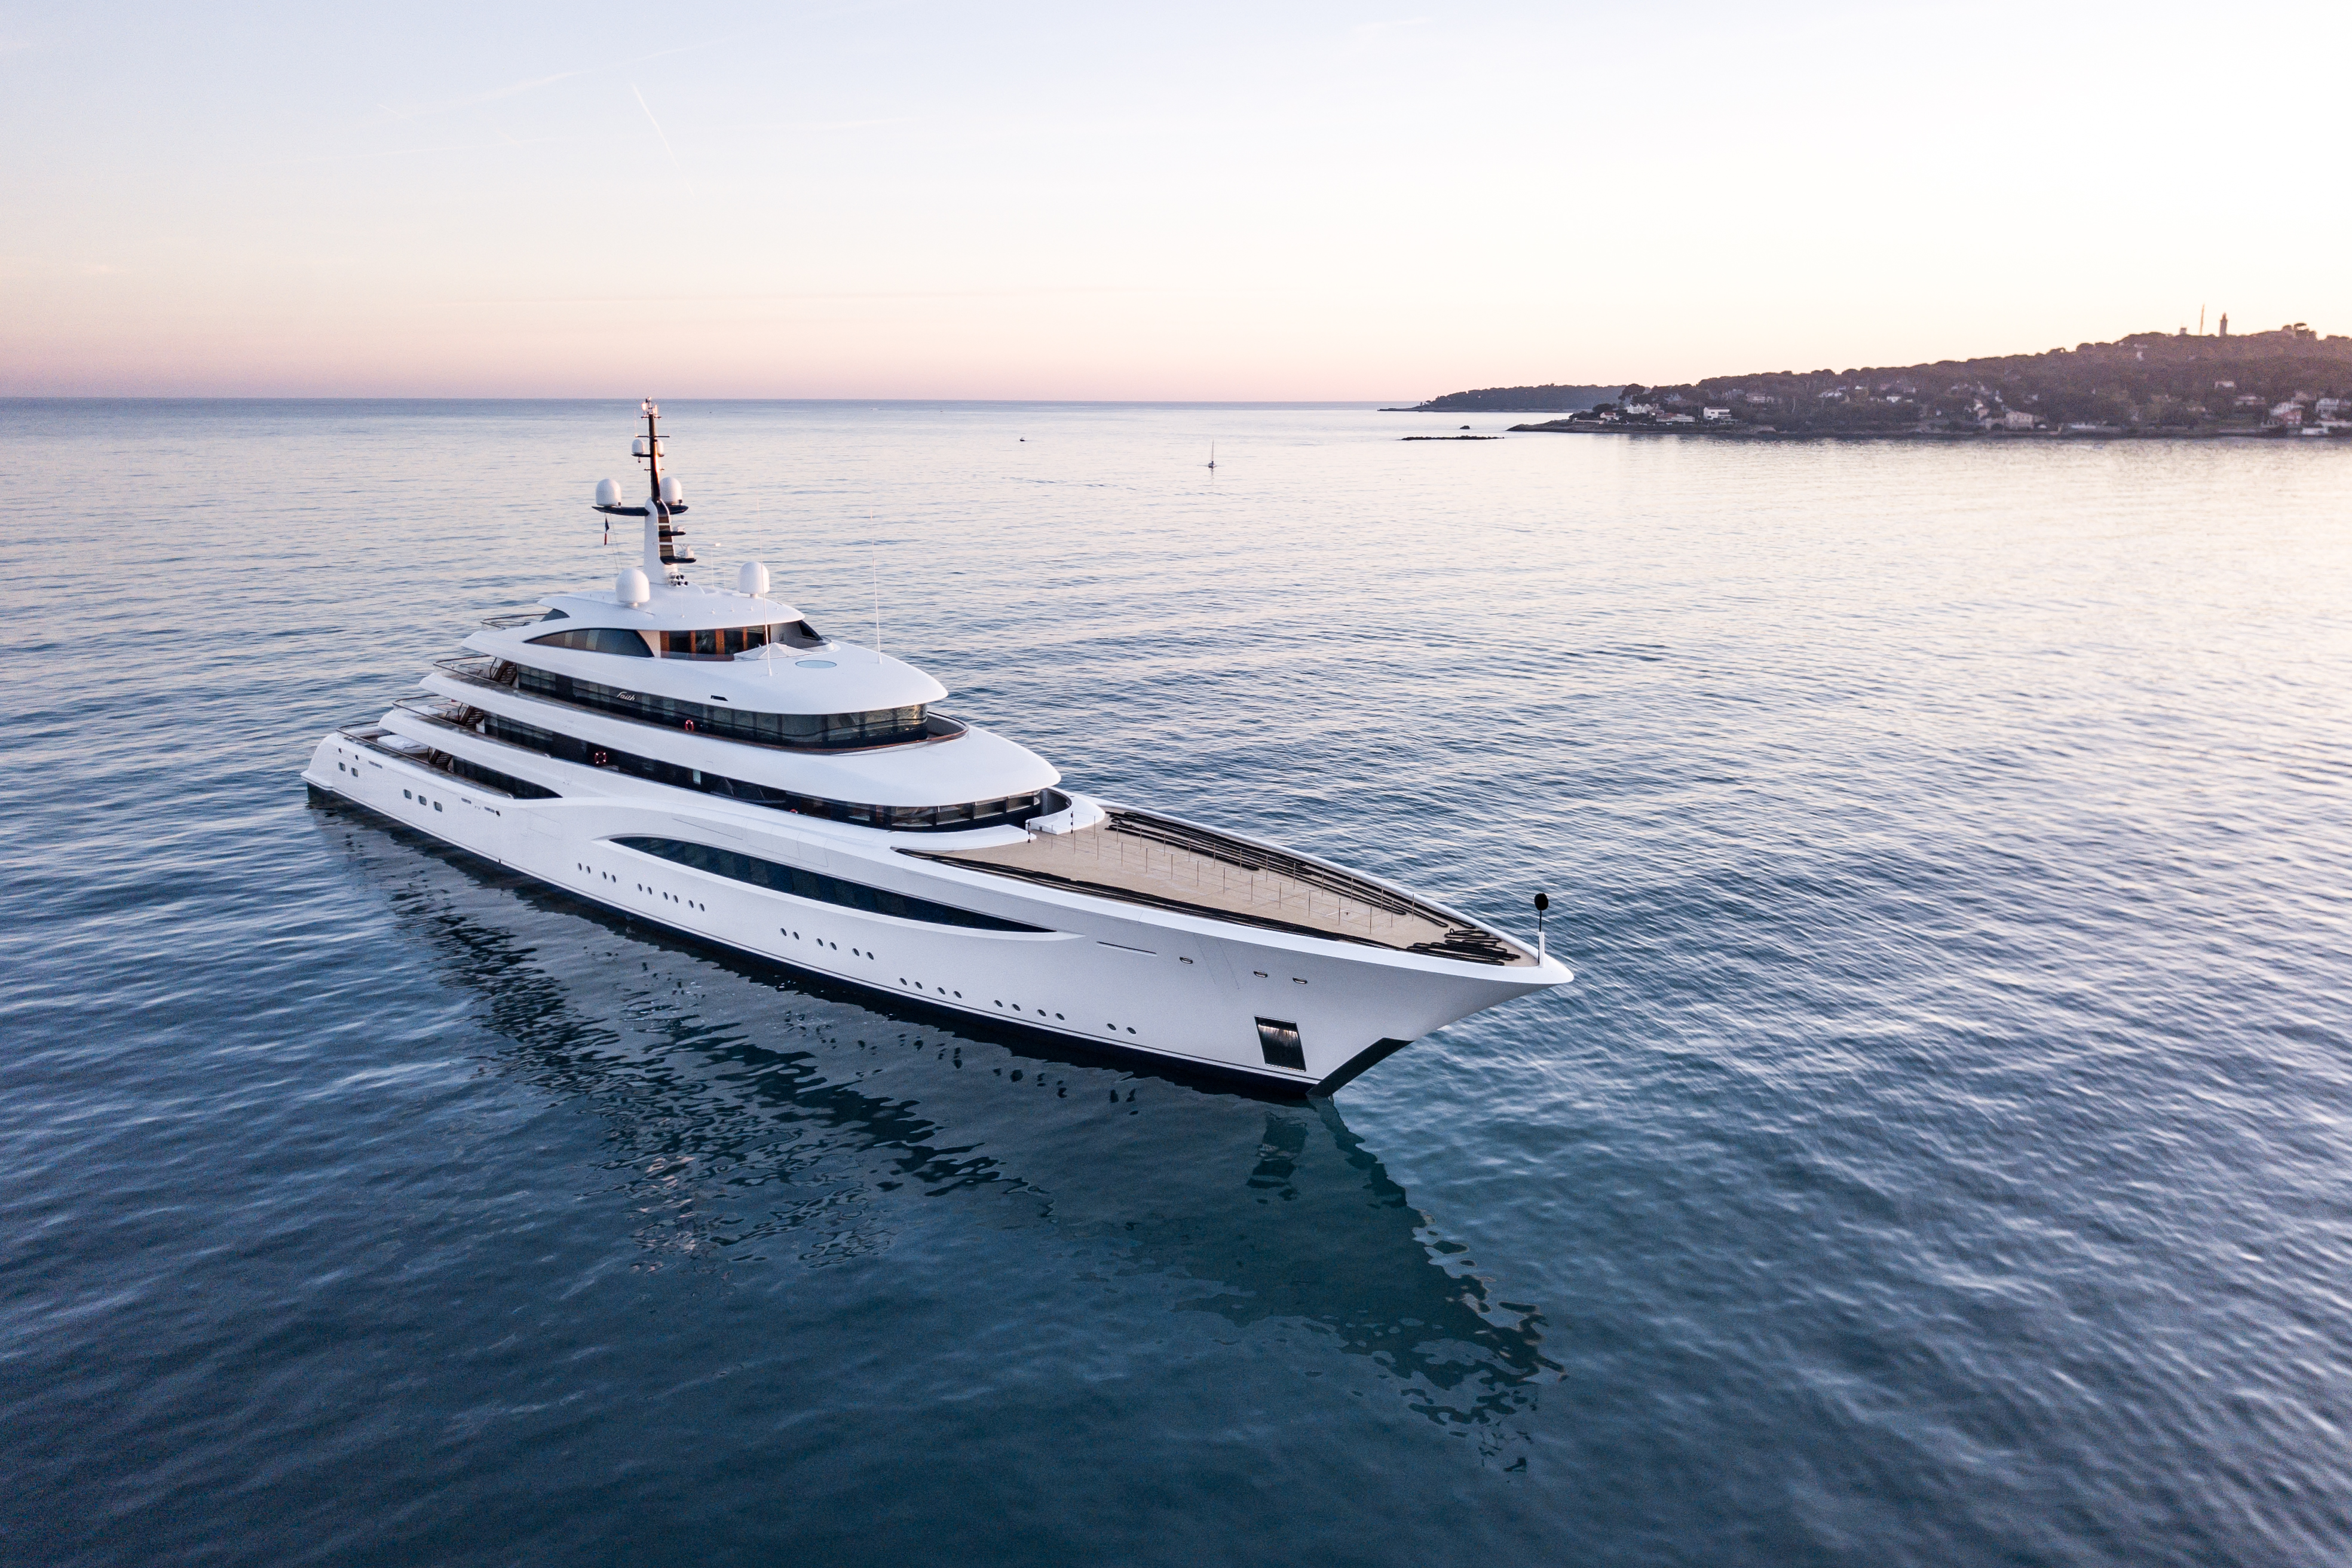 What’s a good profit margin for Yacht ‍Rental Business?